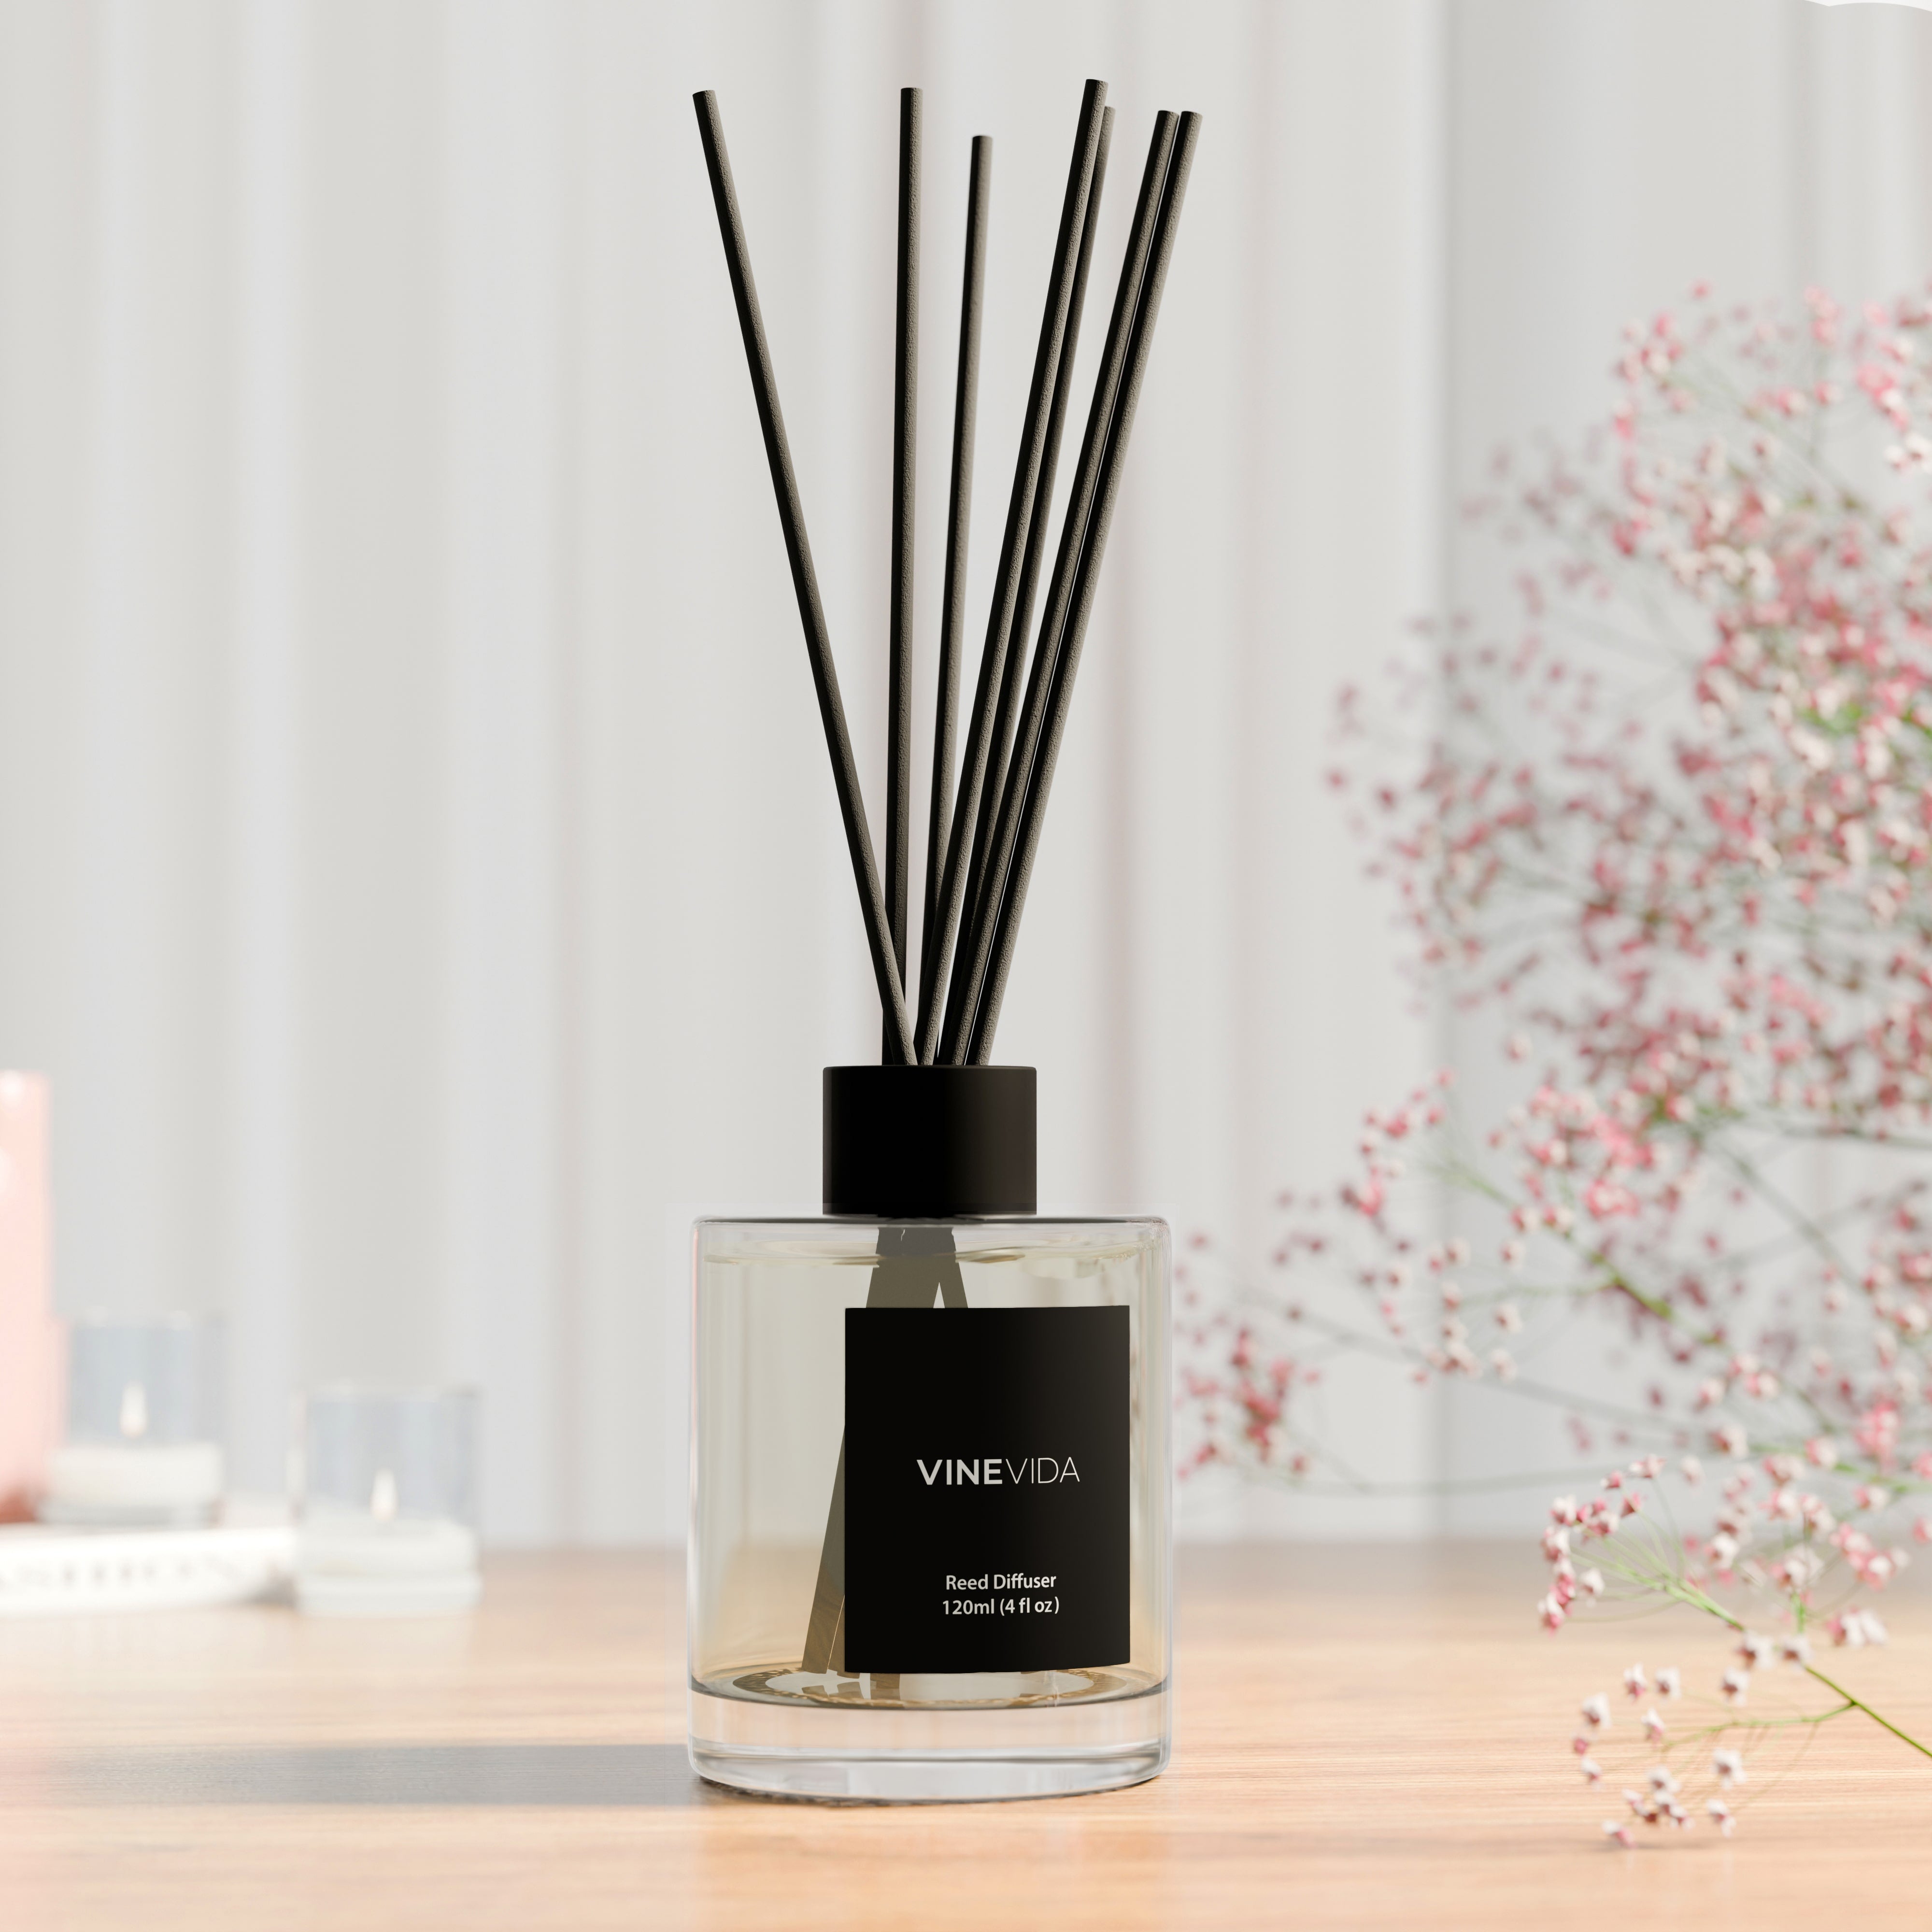 NO. 1118 Reed Diffuser - Inspired by: Sugared Lemon by Bath & Body Works